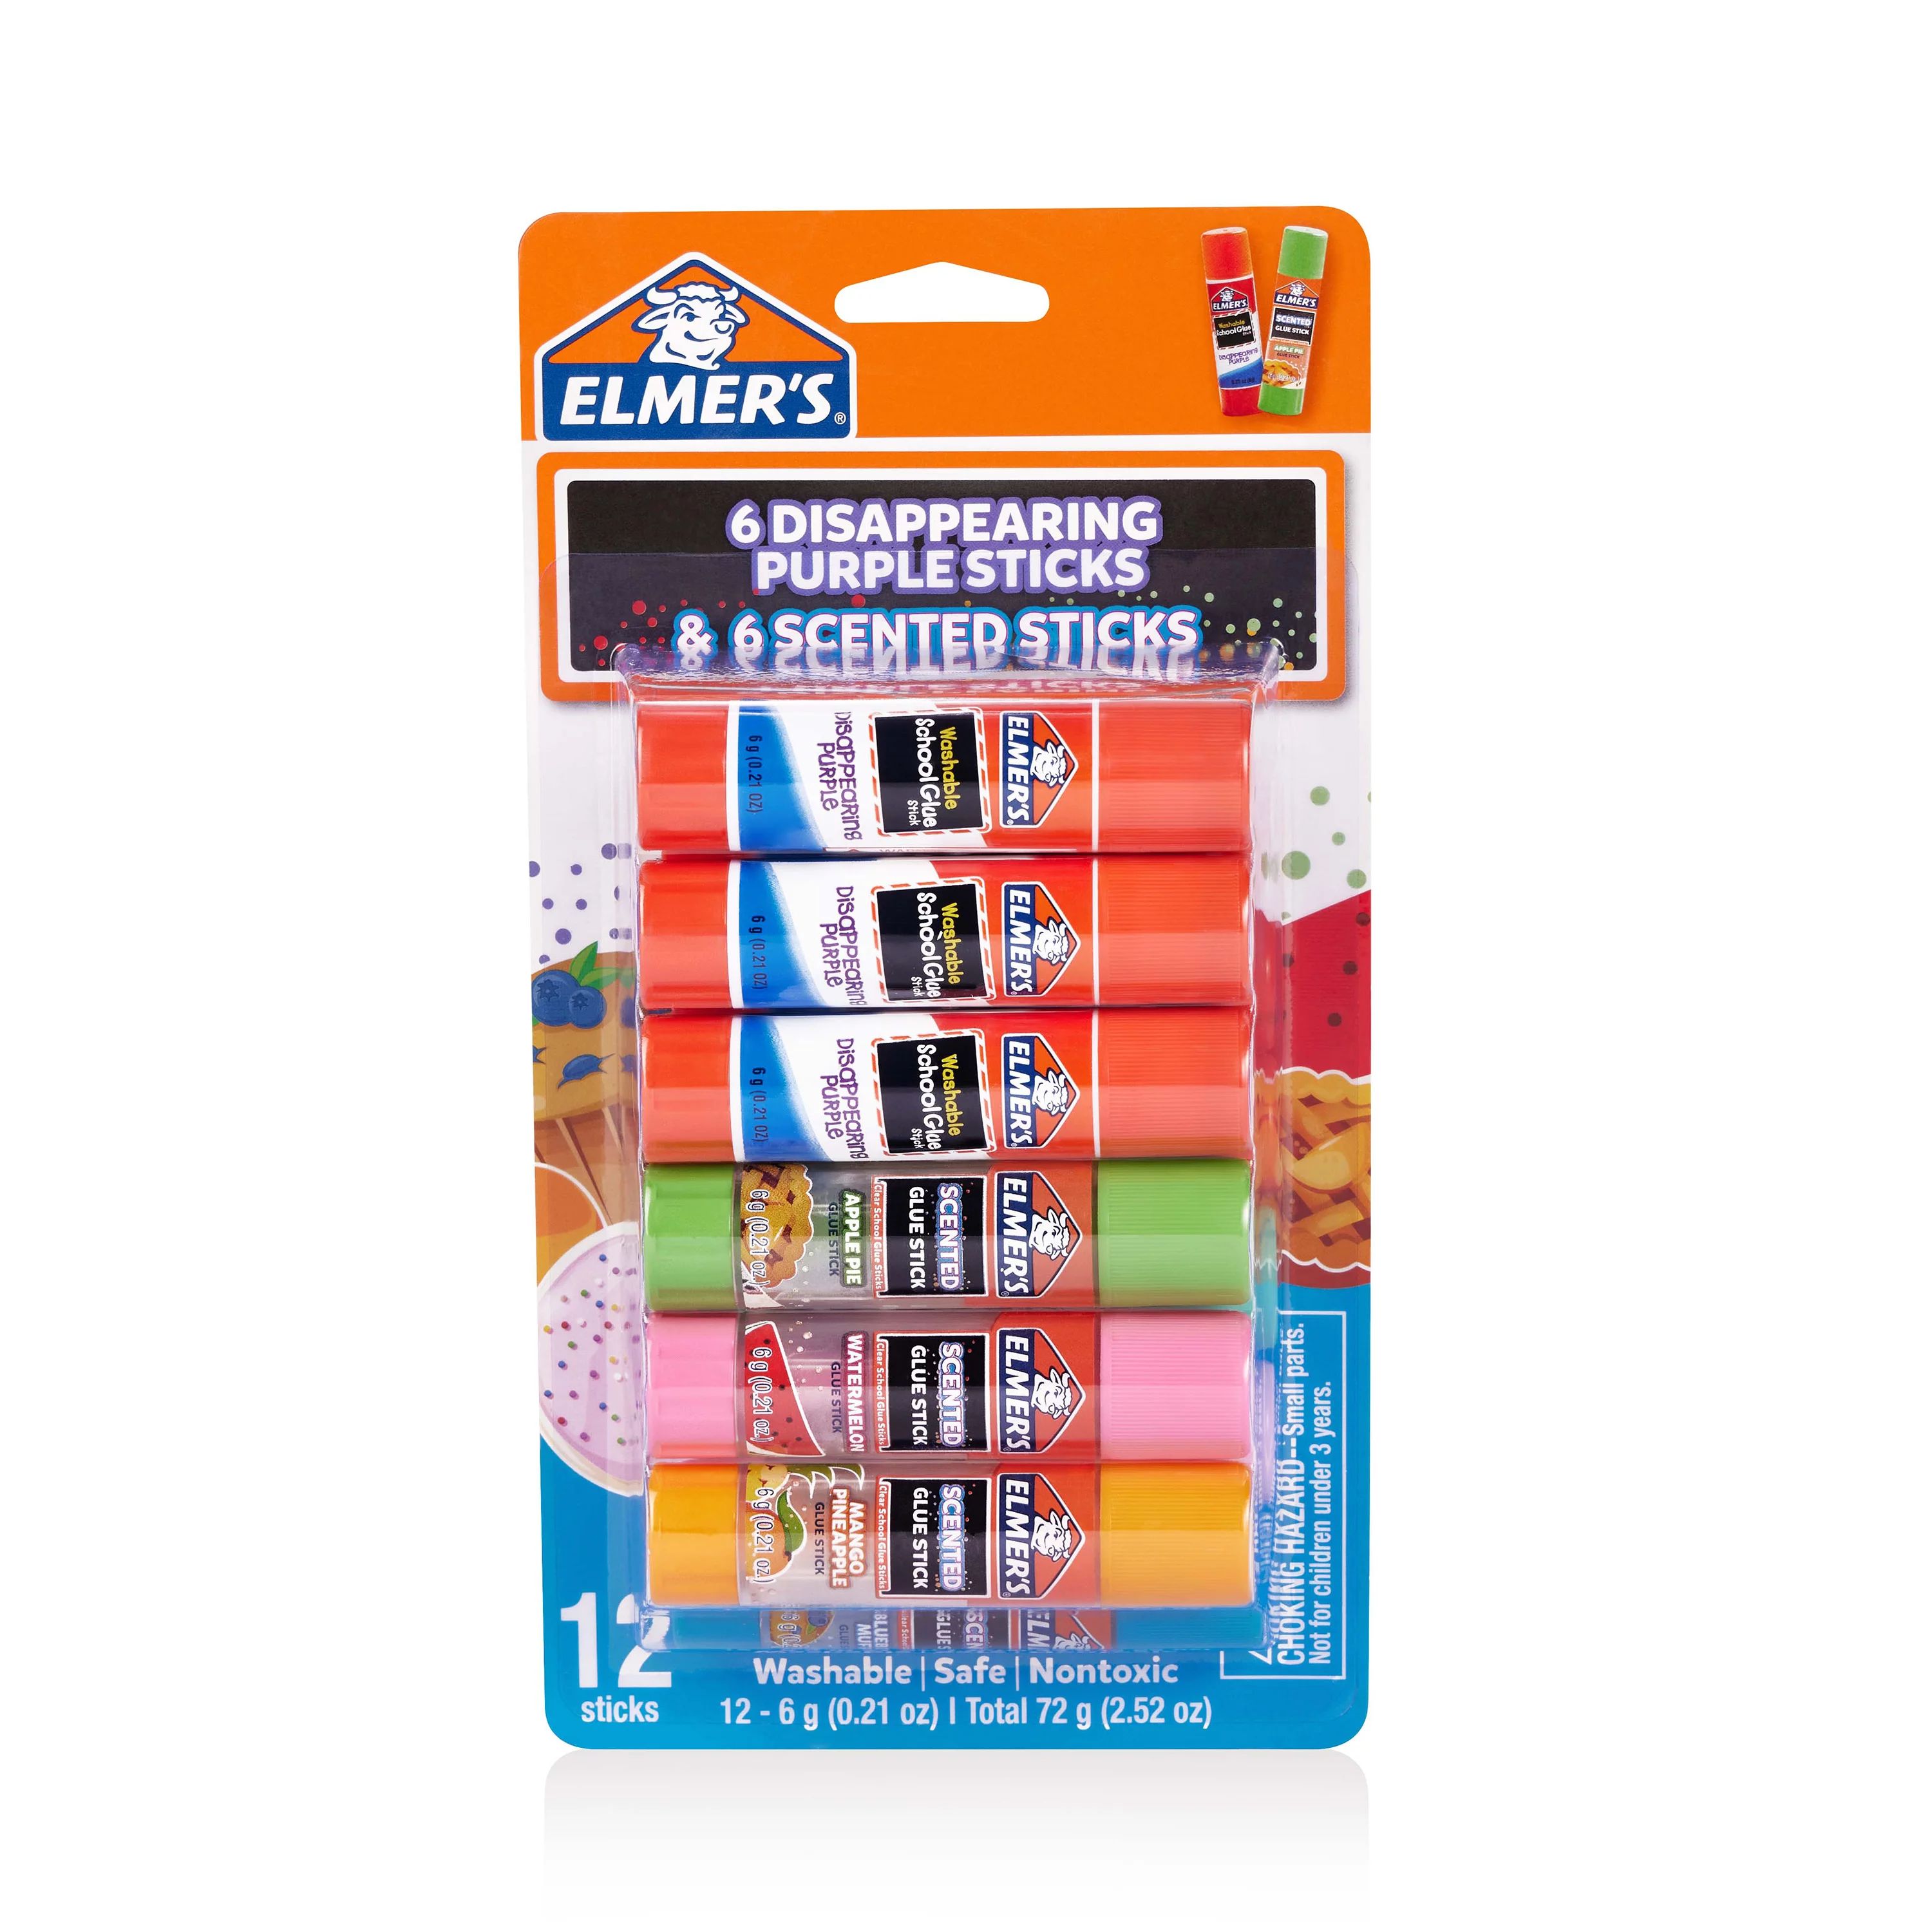 Elmer’s Scented Glue Sticks Variety Pack, Includes Disappearing Purple Glue Sticks, 12 Count - ... | Walmart (US)